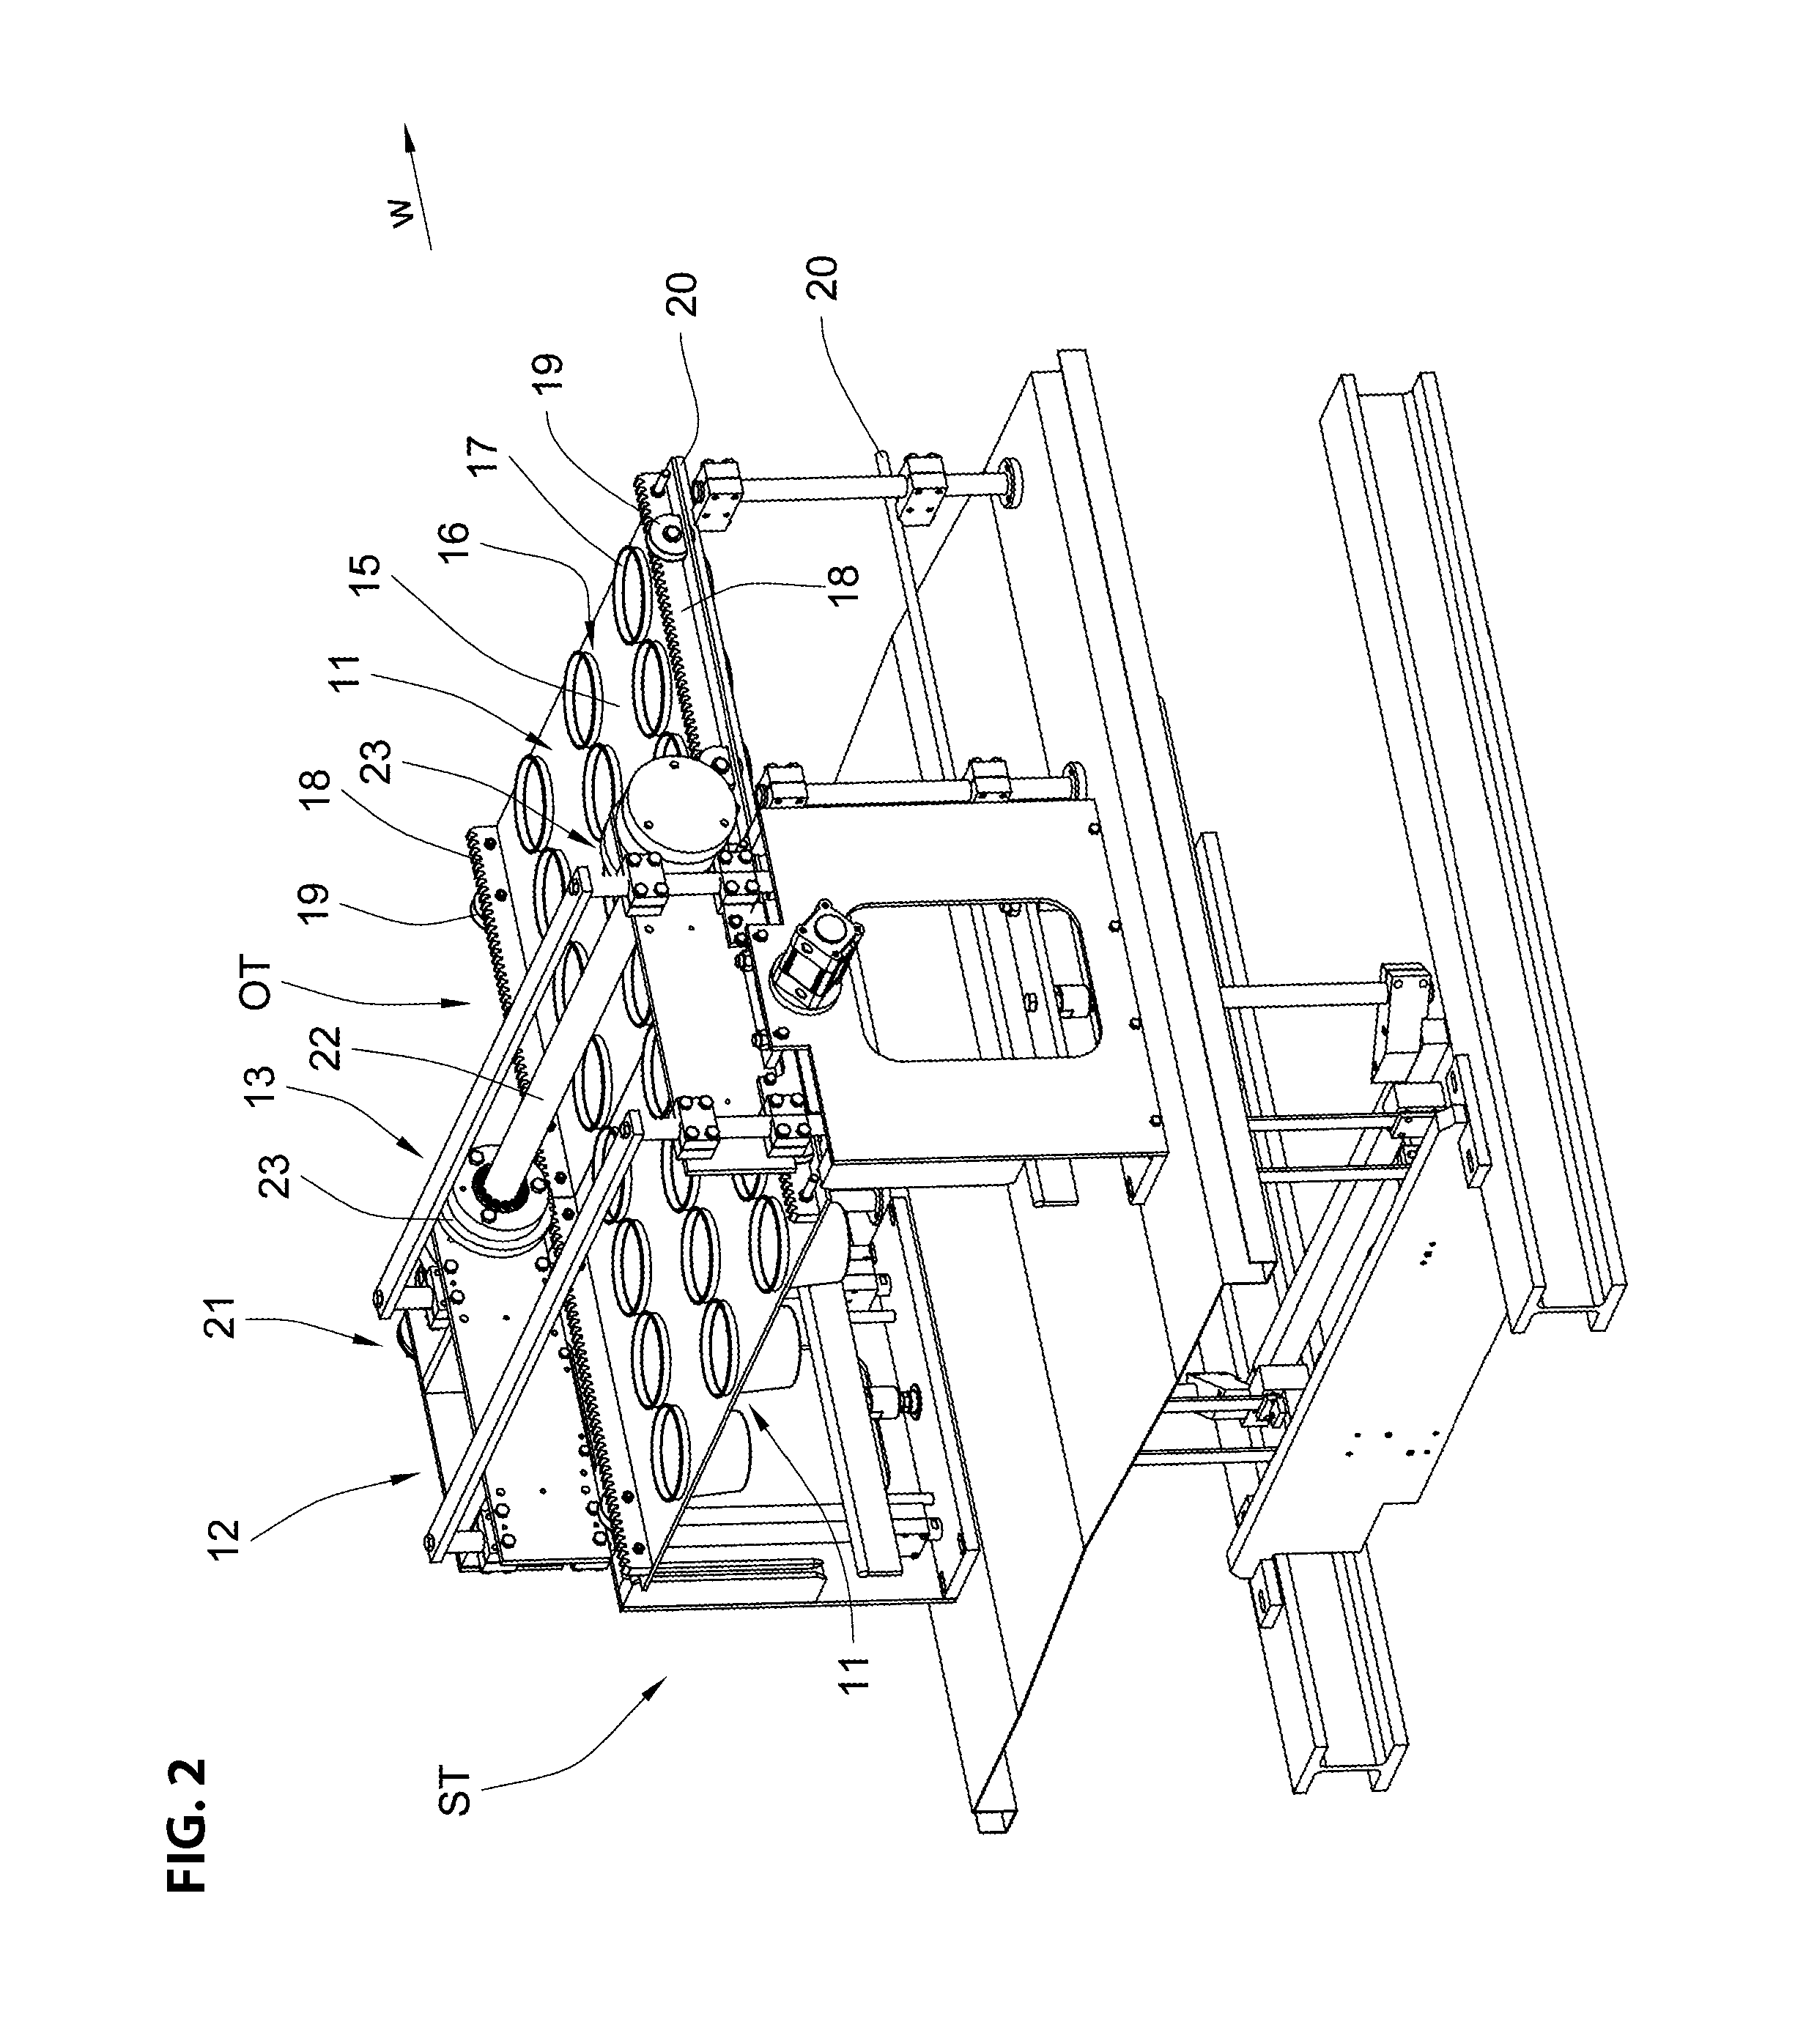 Container filling device